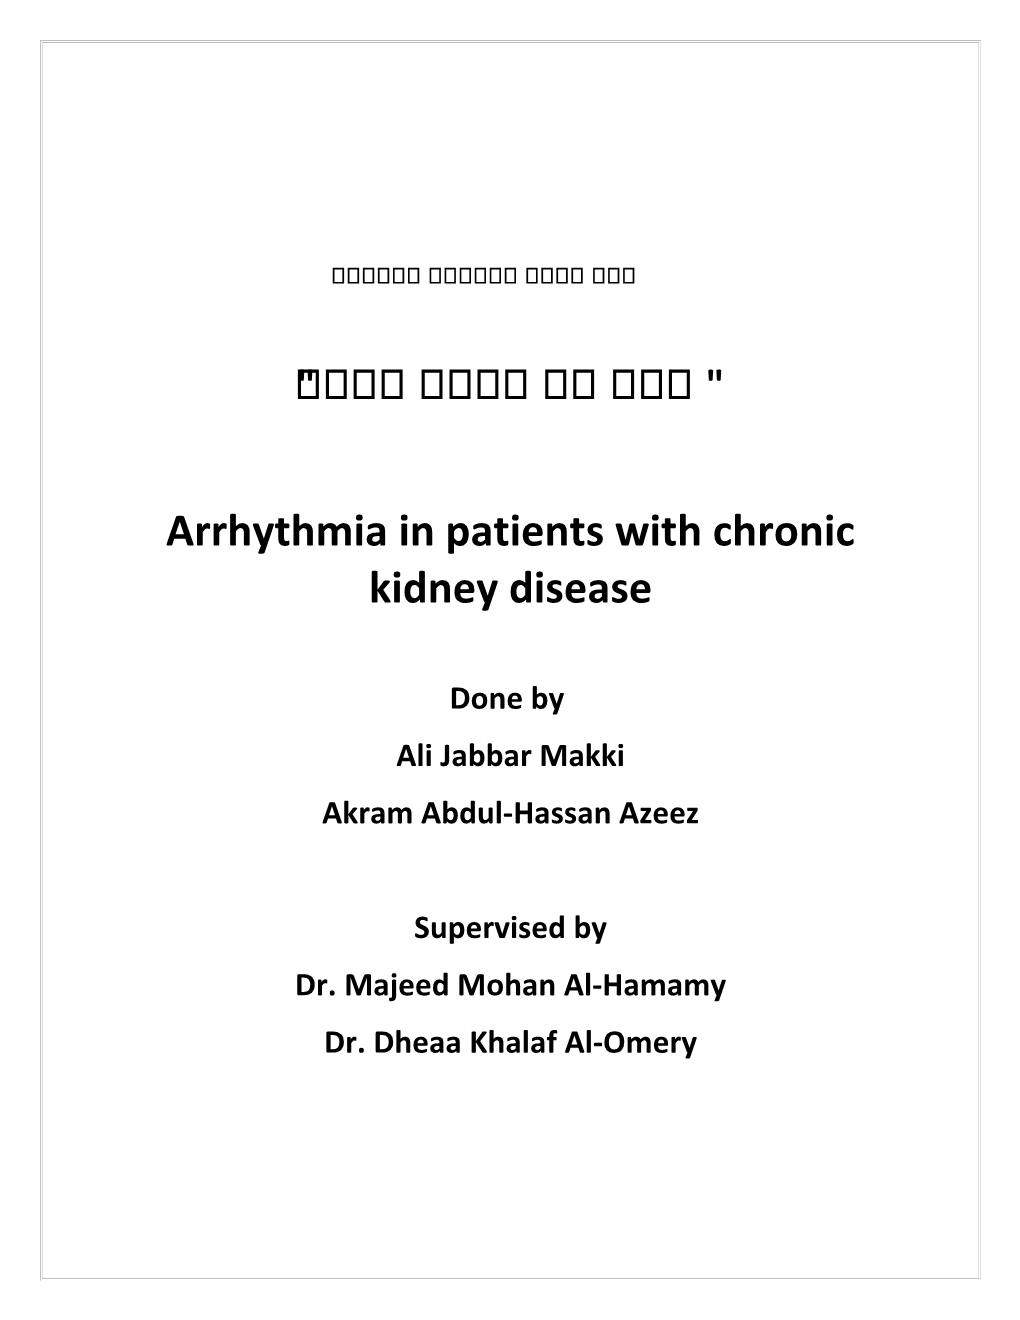 Arrhythmia in Patients with Chronic Kidney Disease